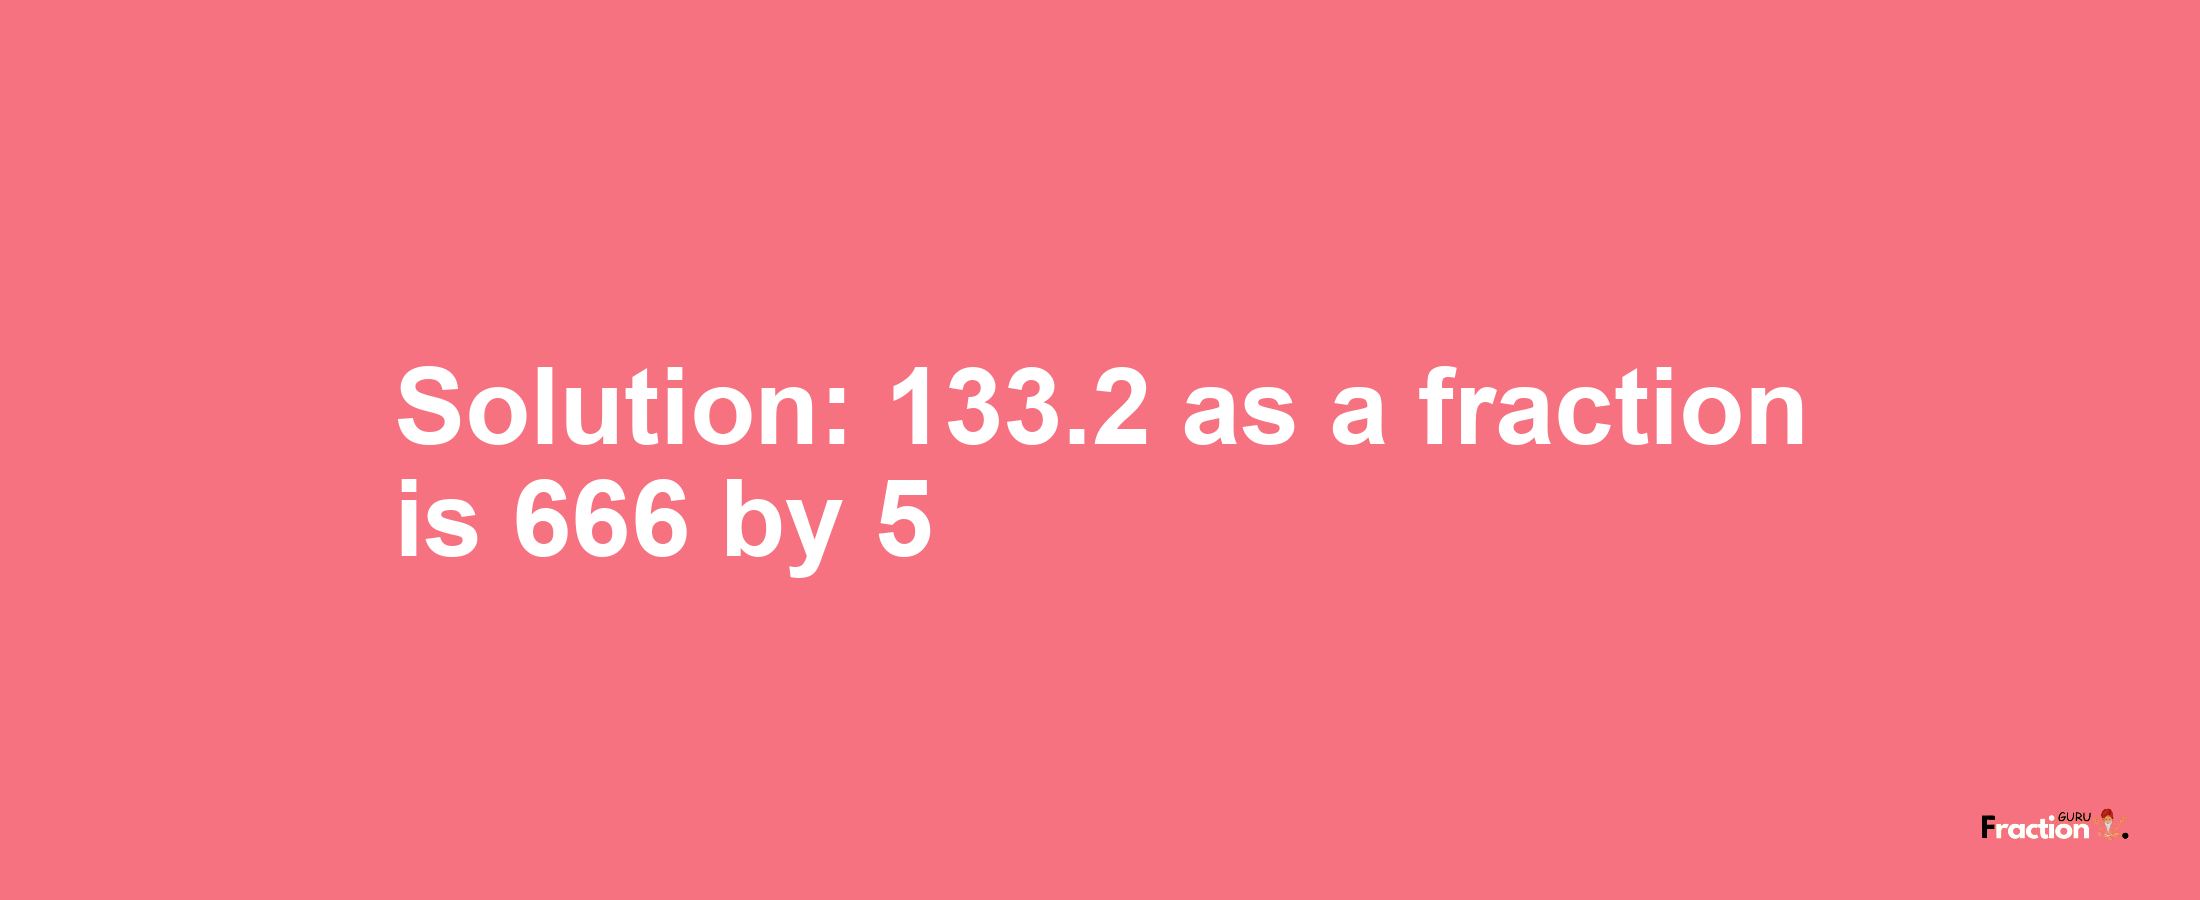 Solution:133.2 as a fraction is 666/5